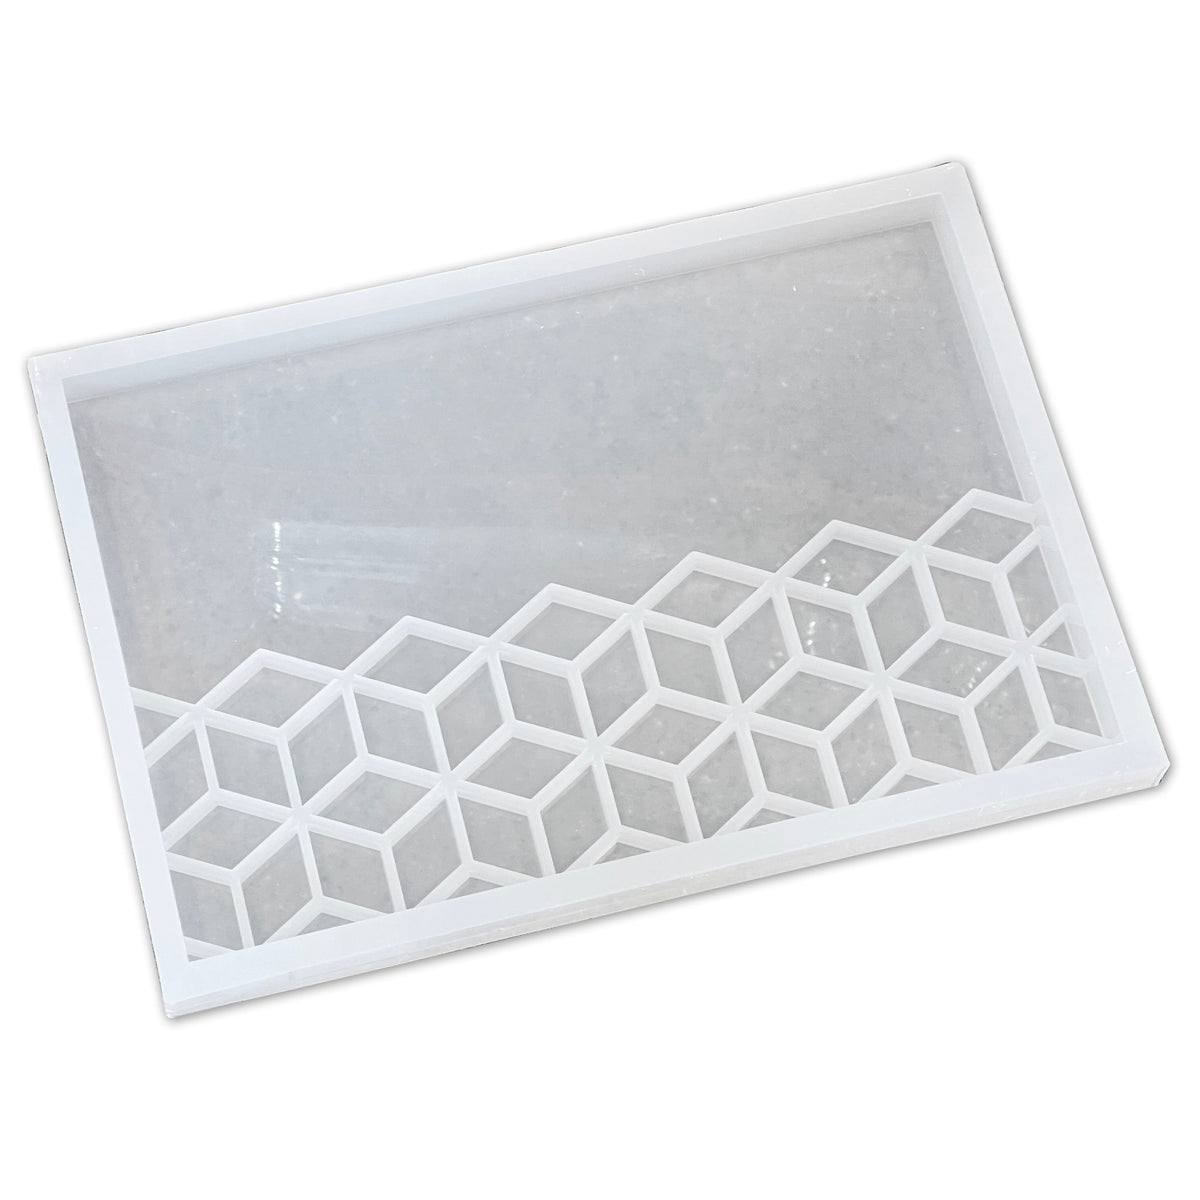 Square Chunk 1 Inch Embeds 25 Cavity Silicone Mold 2281